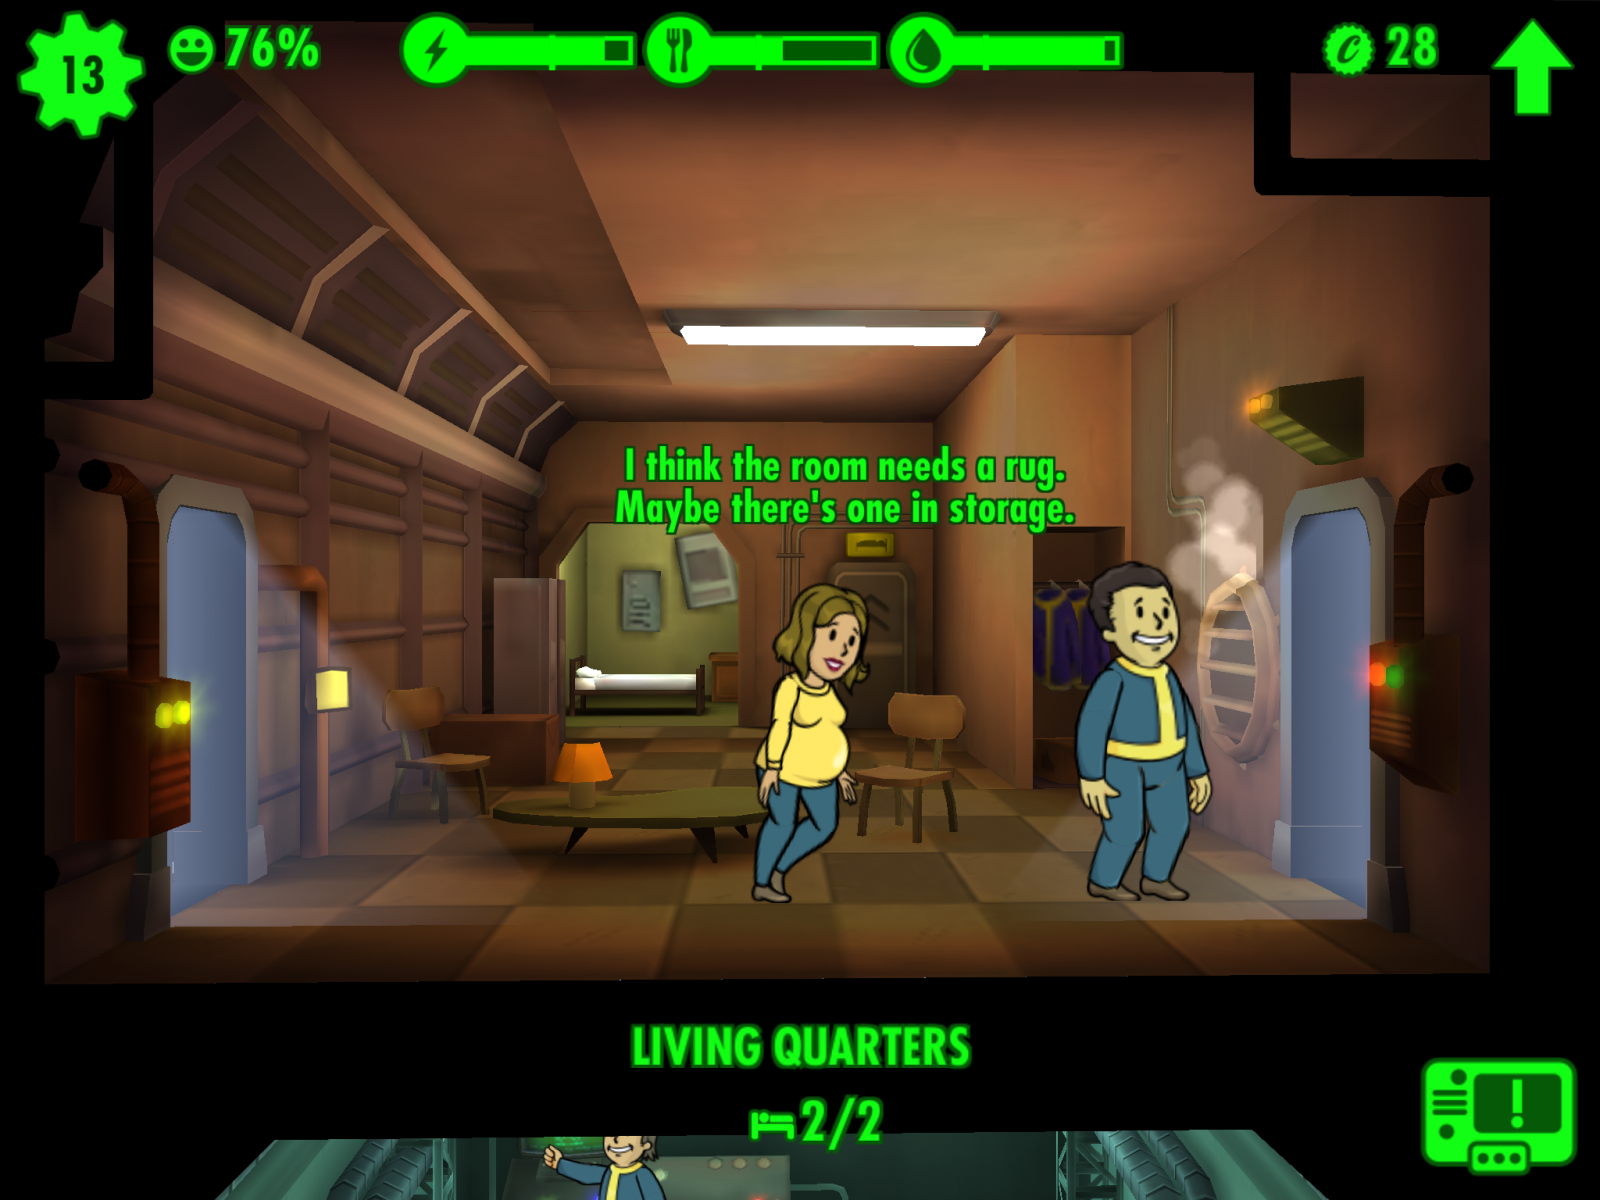 fallout shelter can stats go above 10